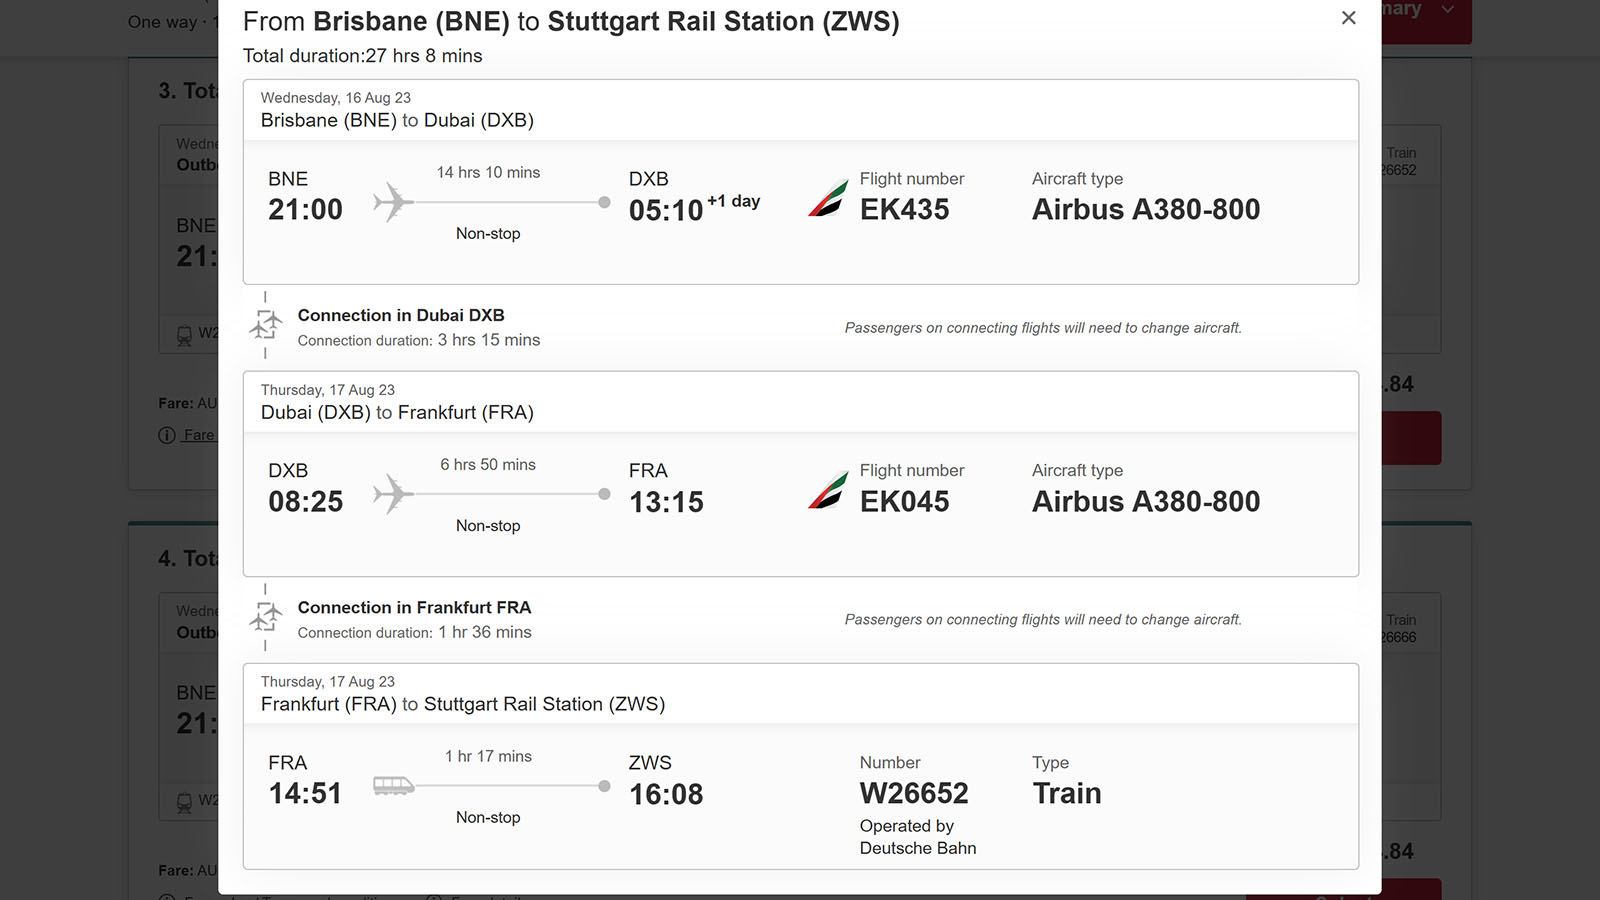 Rail and flights on a single booking with Emirates and Deutsche Bahn